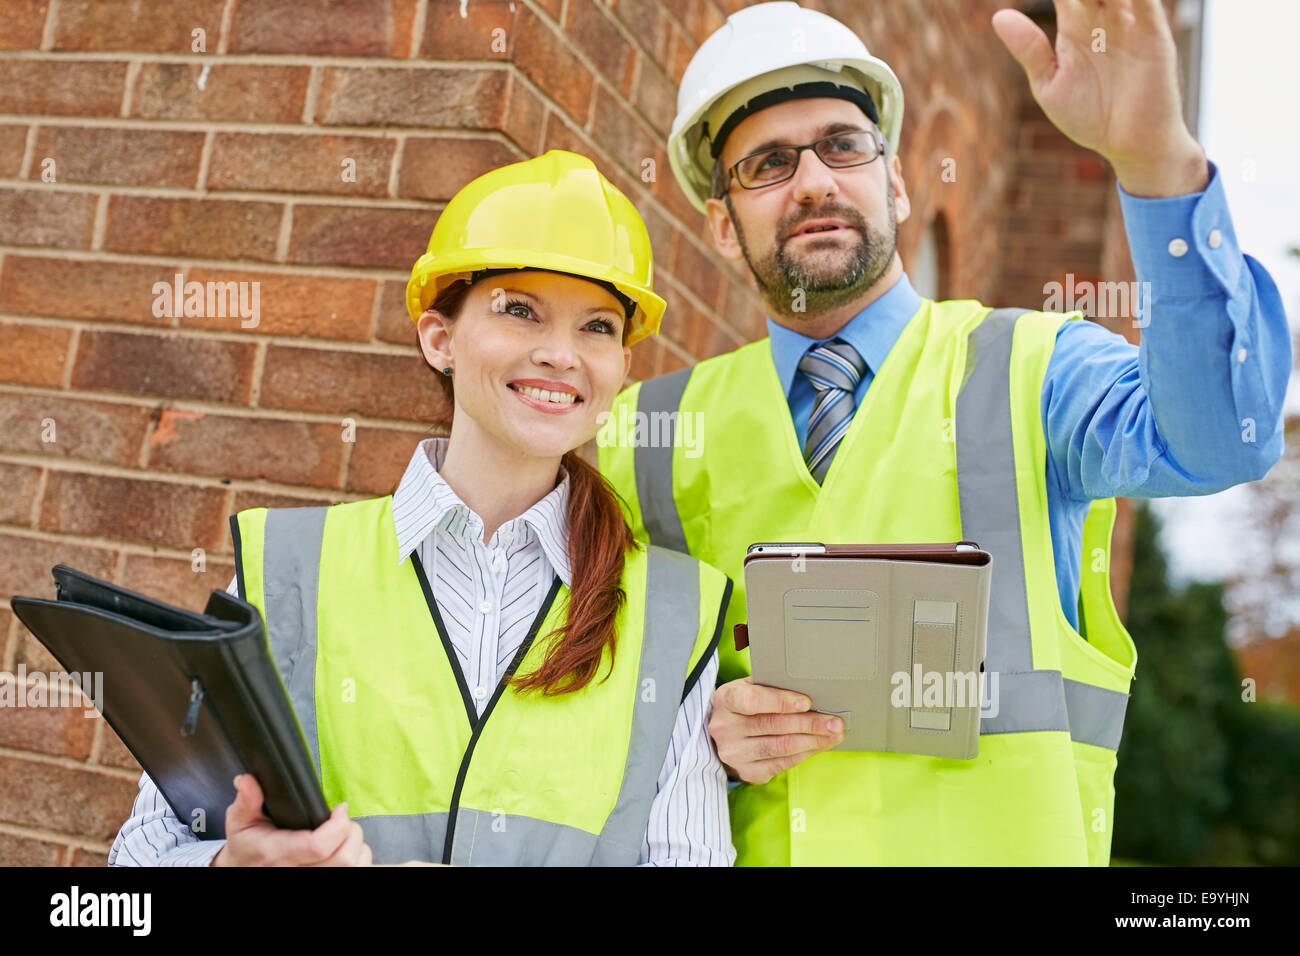 Architects discussing plans at a building site Stock Photo